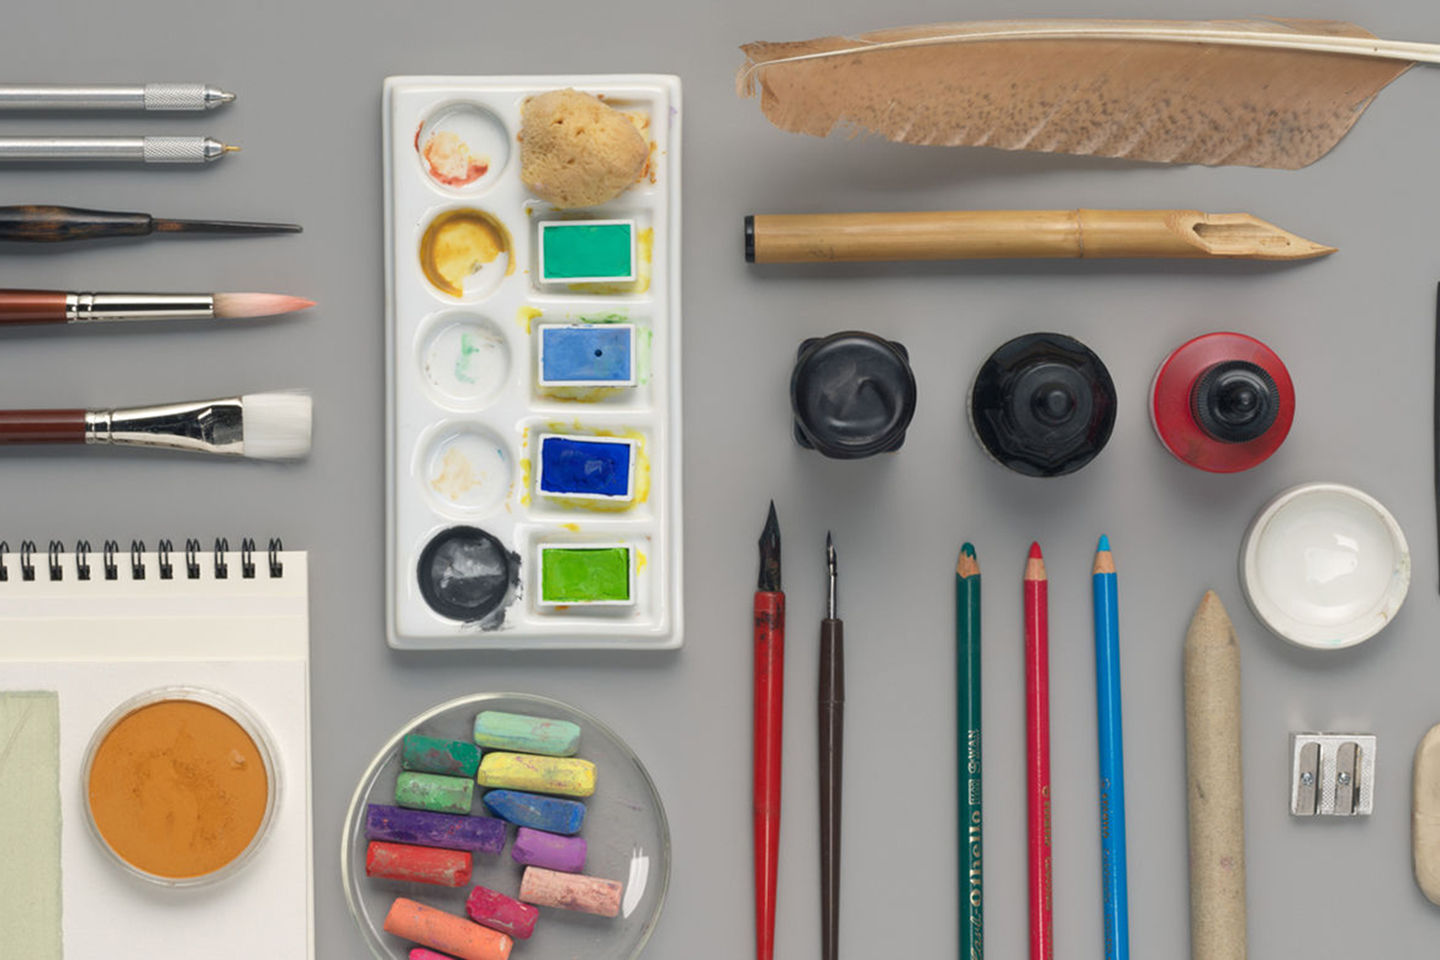 A variety of drawing tools, including pens, markers, brushes, and various inks and pigments.